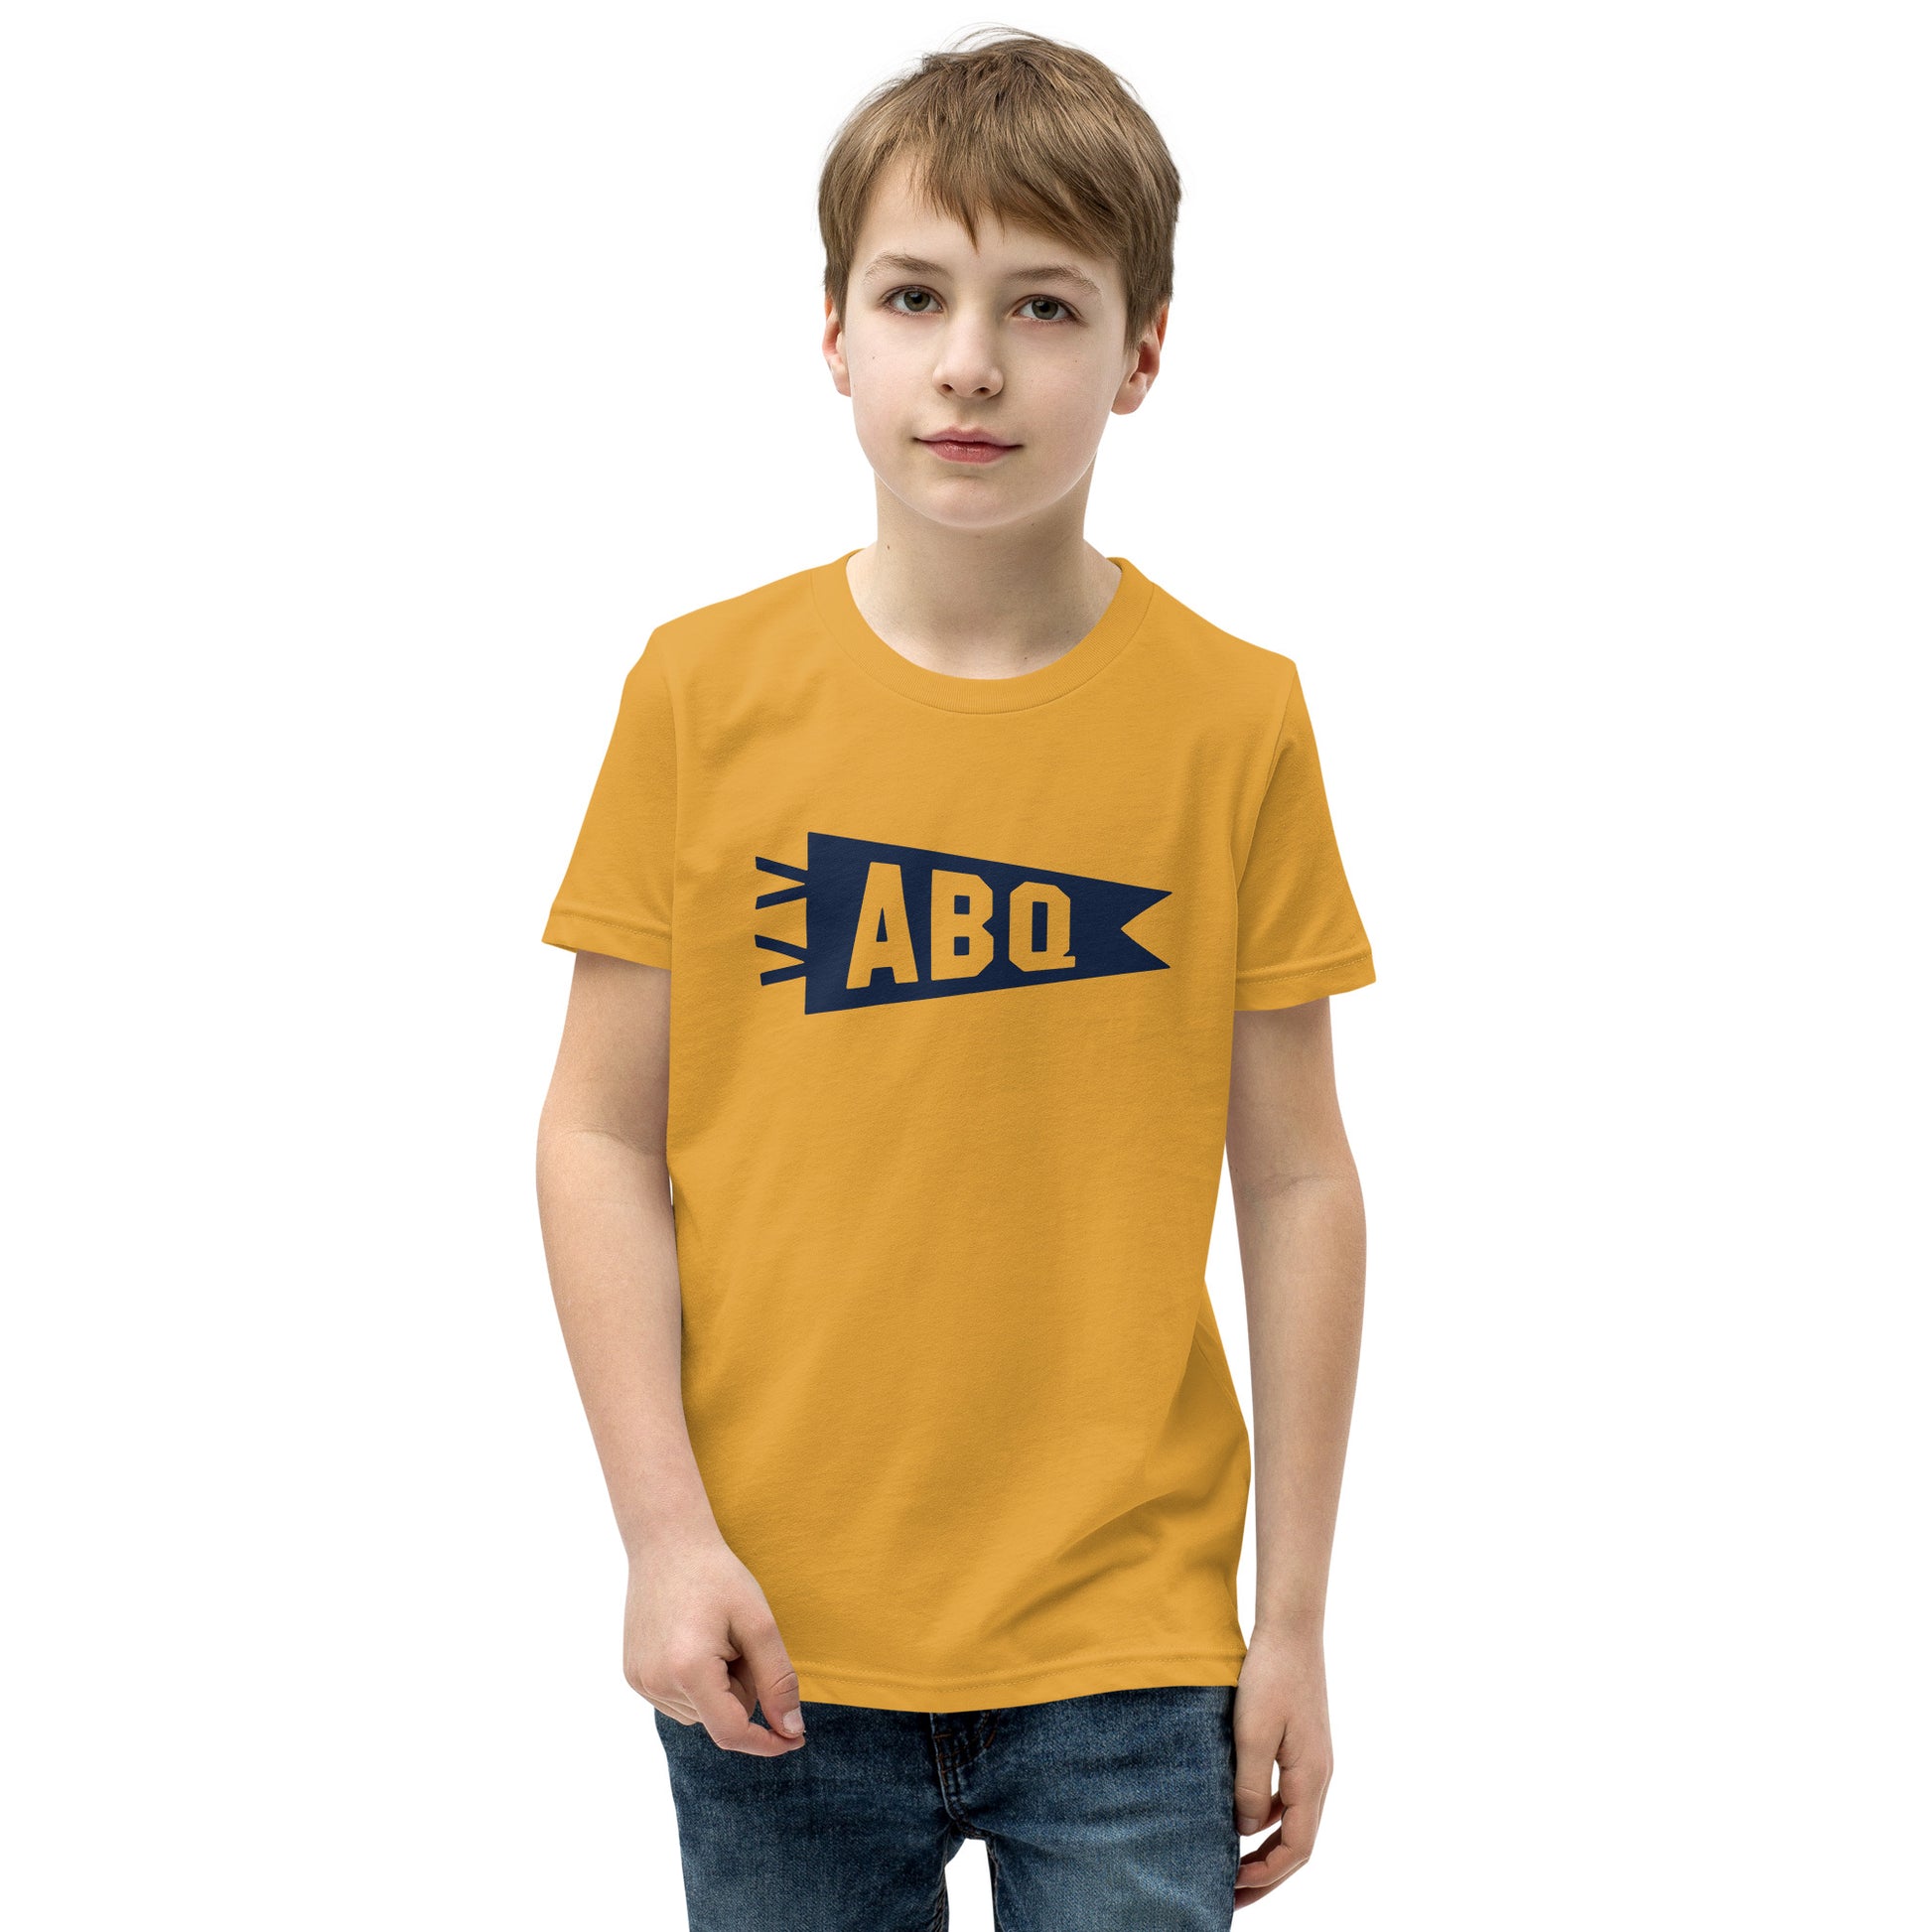 Kid's Airport Code Tee - Navy Blue Graphic • ABQ Albuquerque • YHM Designs - Image 08